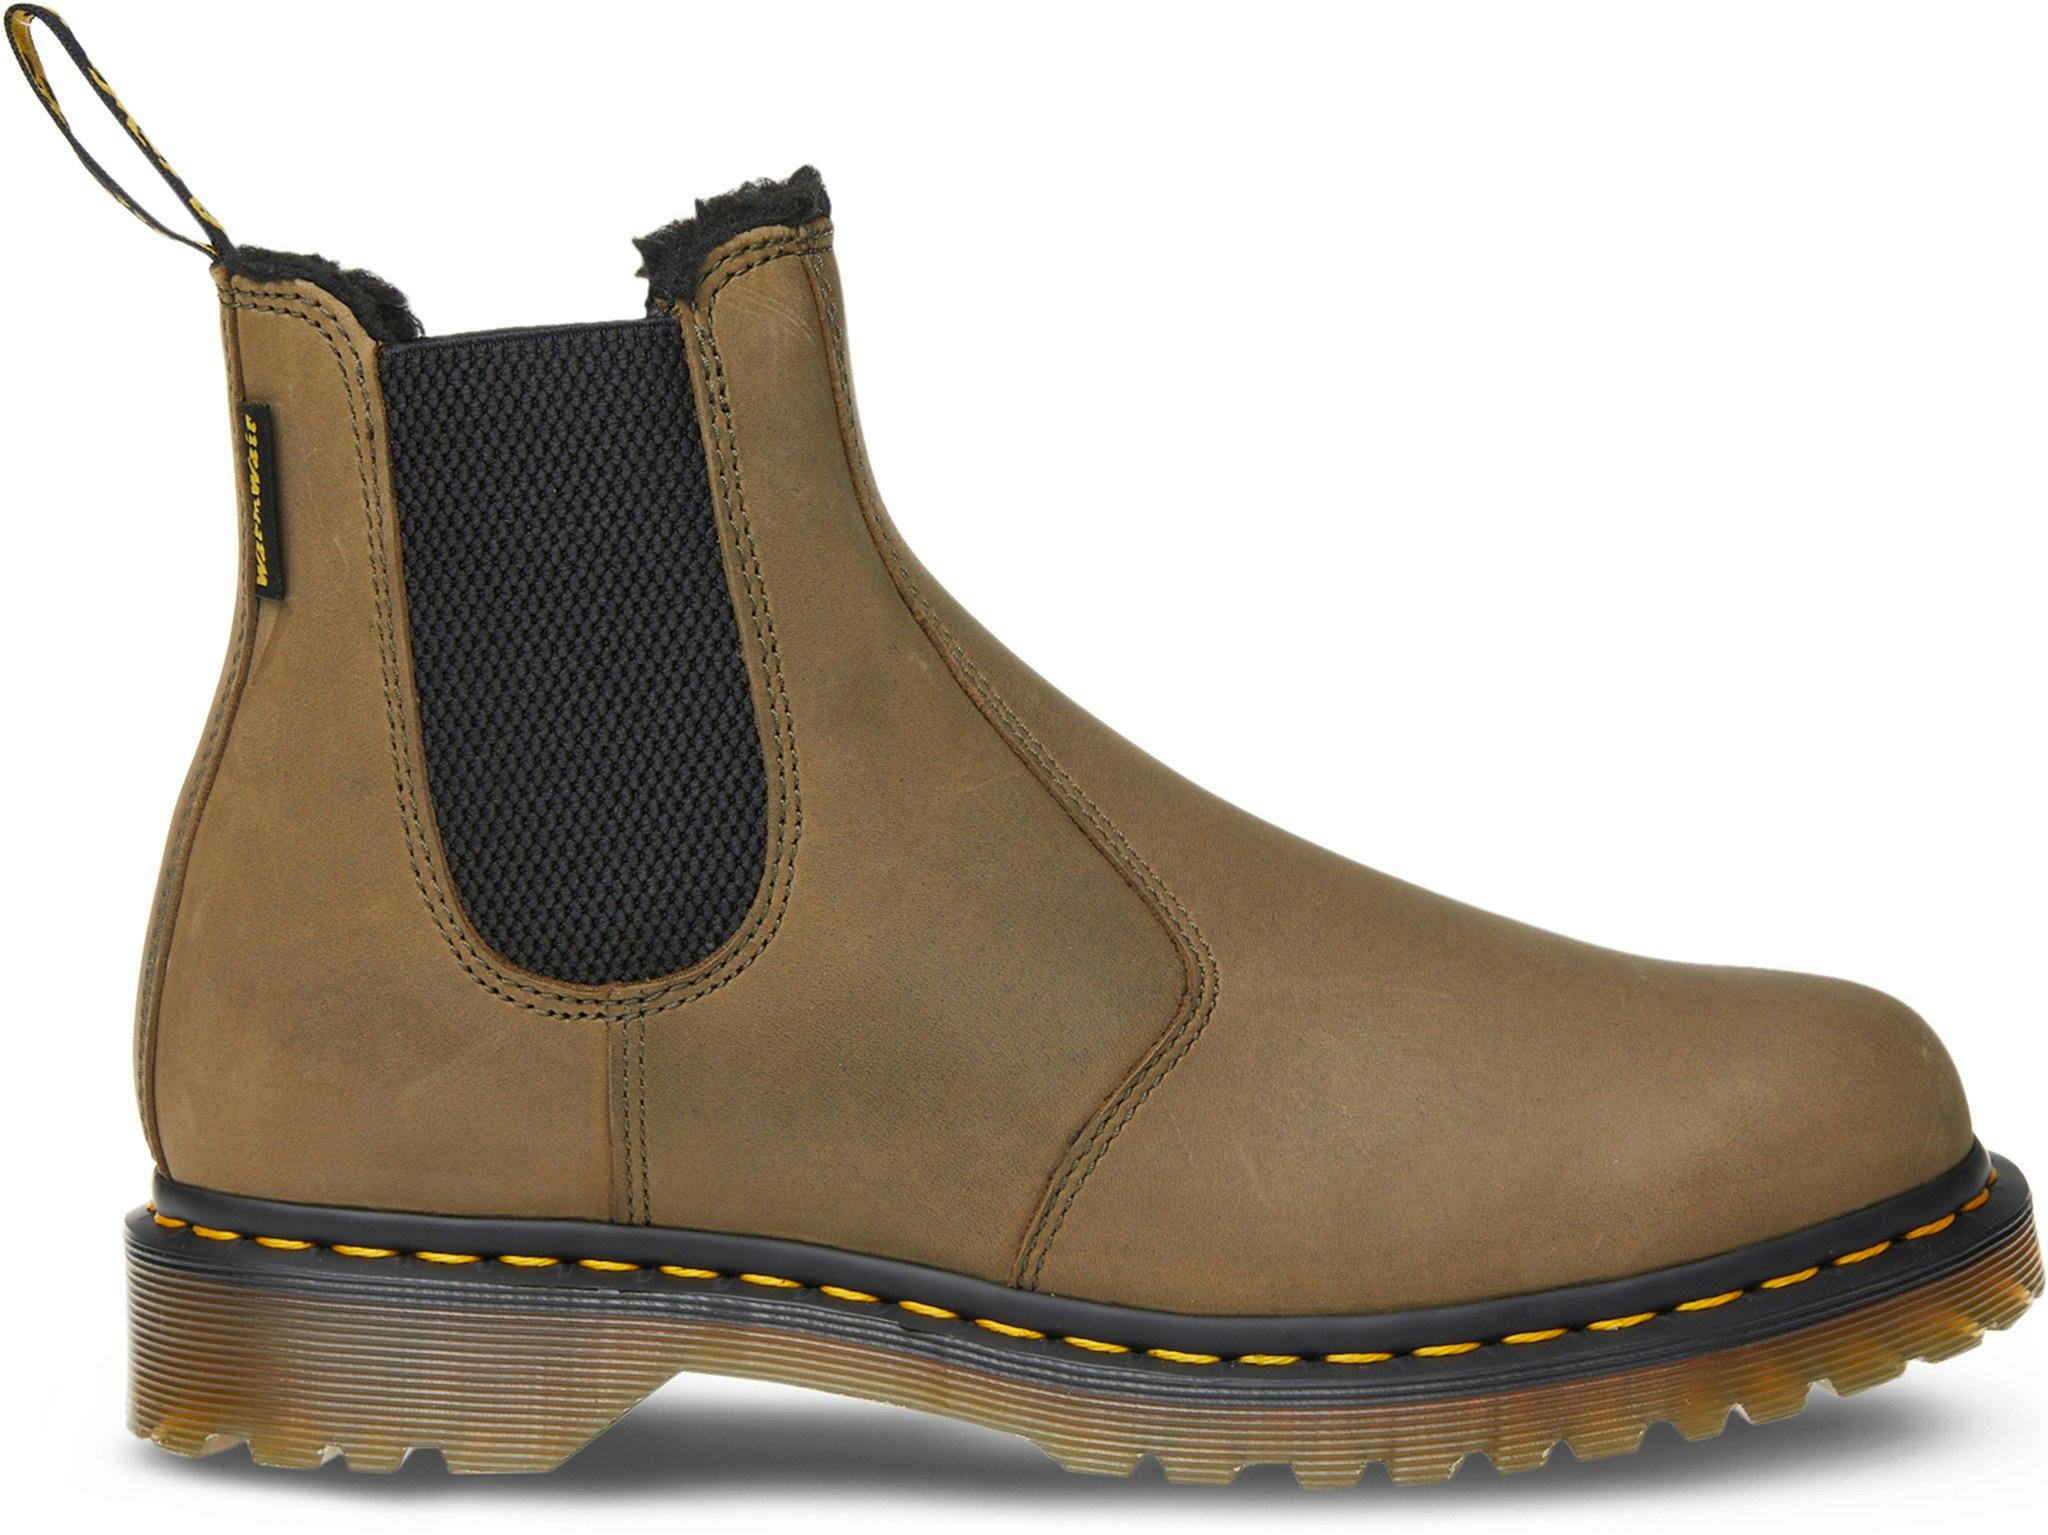 Product image for 2976 Smooth Leather Chelsea Boot - Men's